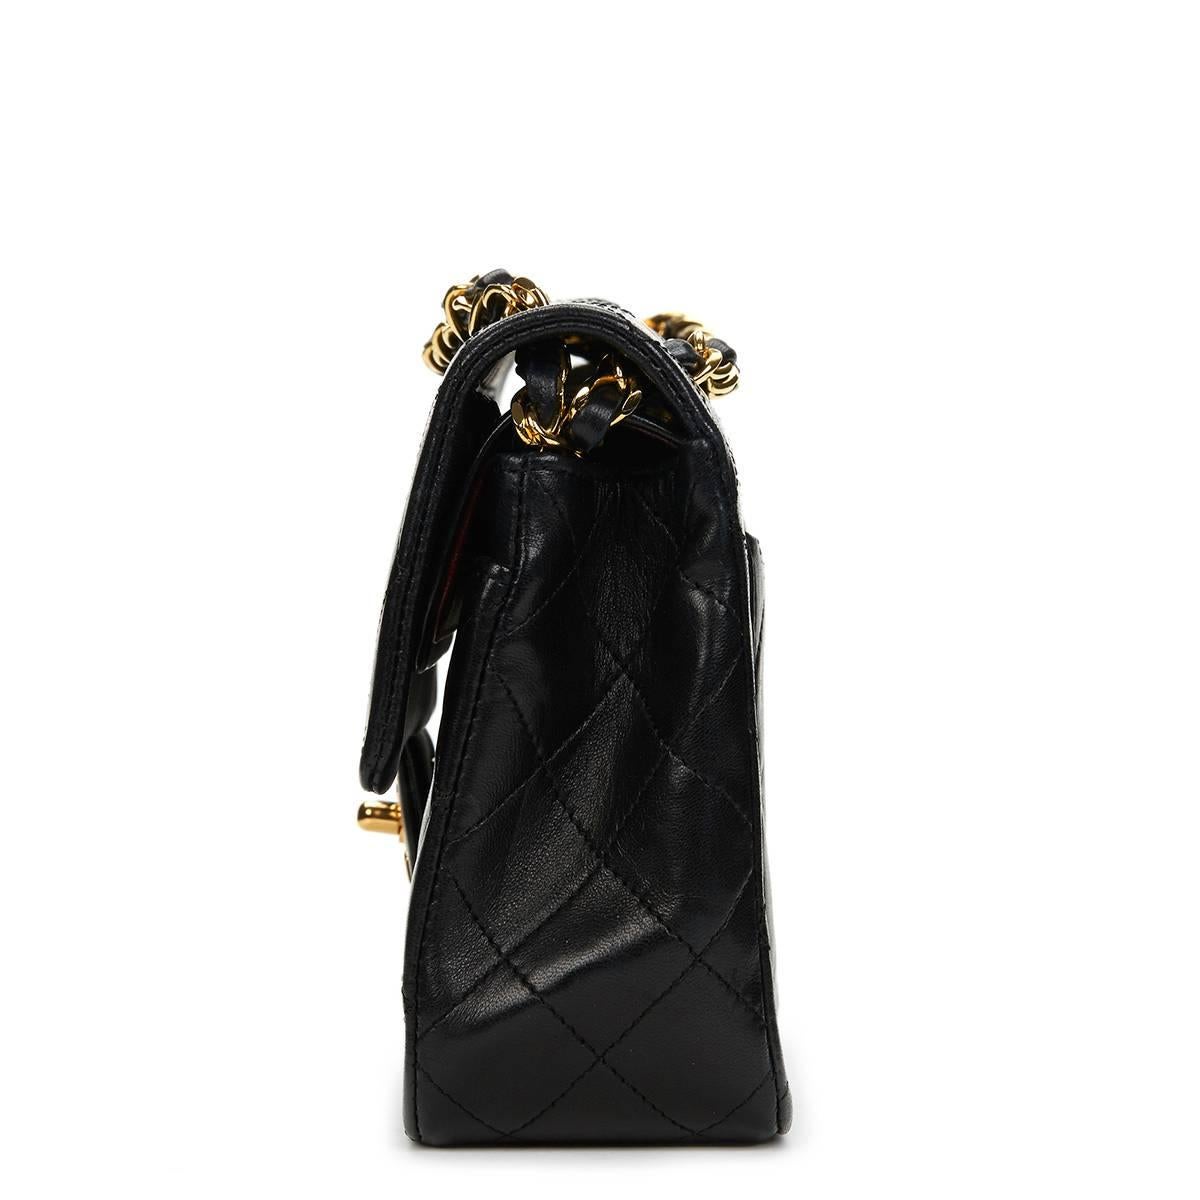 CHANEL
Black Quilted Lambskin Vintage Small Classic Double Flap Bag

This CHANEL Small Classic Double Flap Bag is in Excellent Pre-Owned Condition. Circa 1989. Primarily made from Lambskin Leather complimented by Gold hardware. Our  reference is